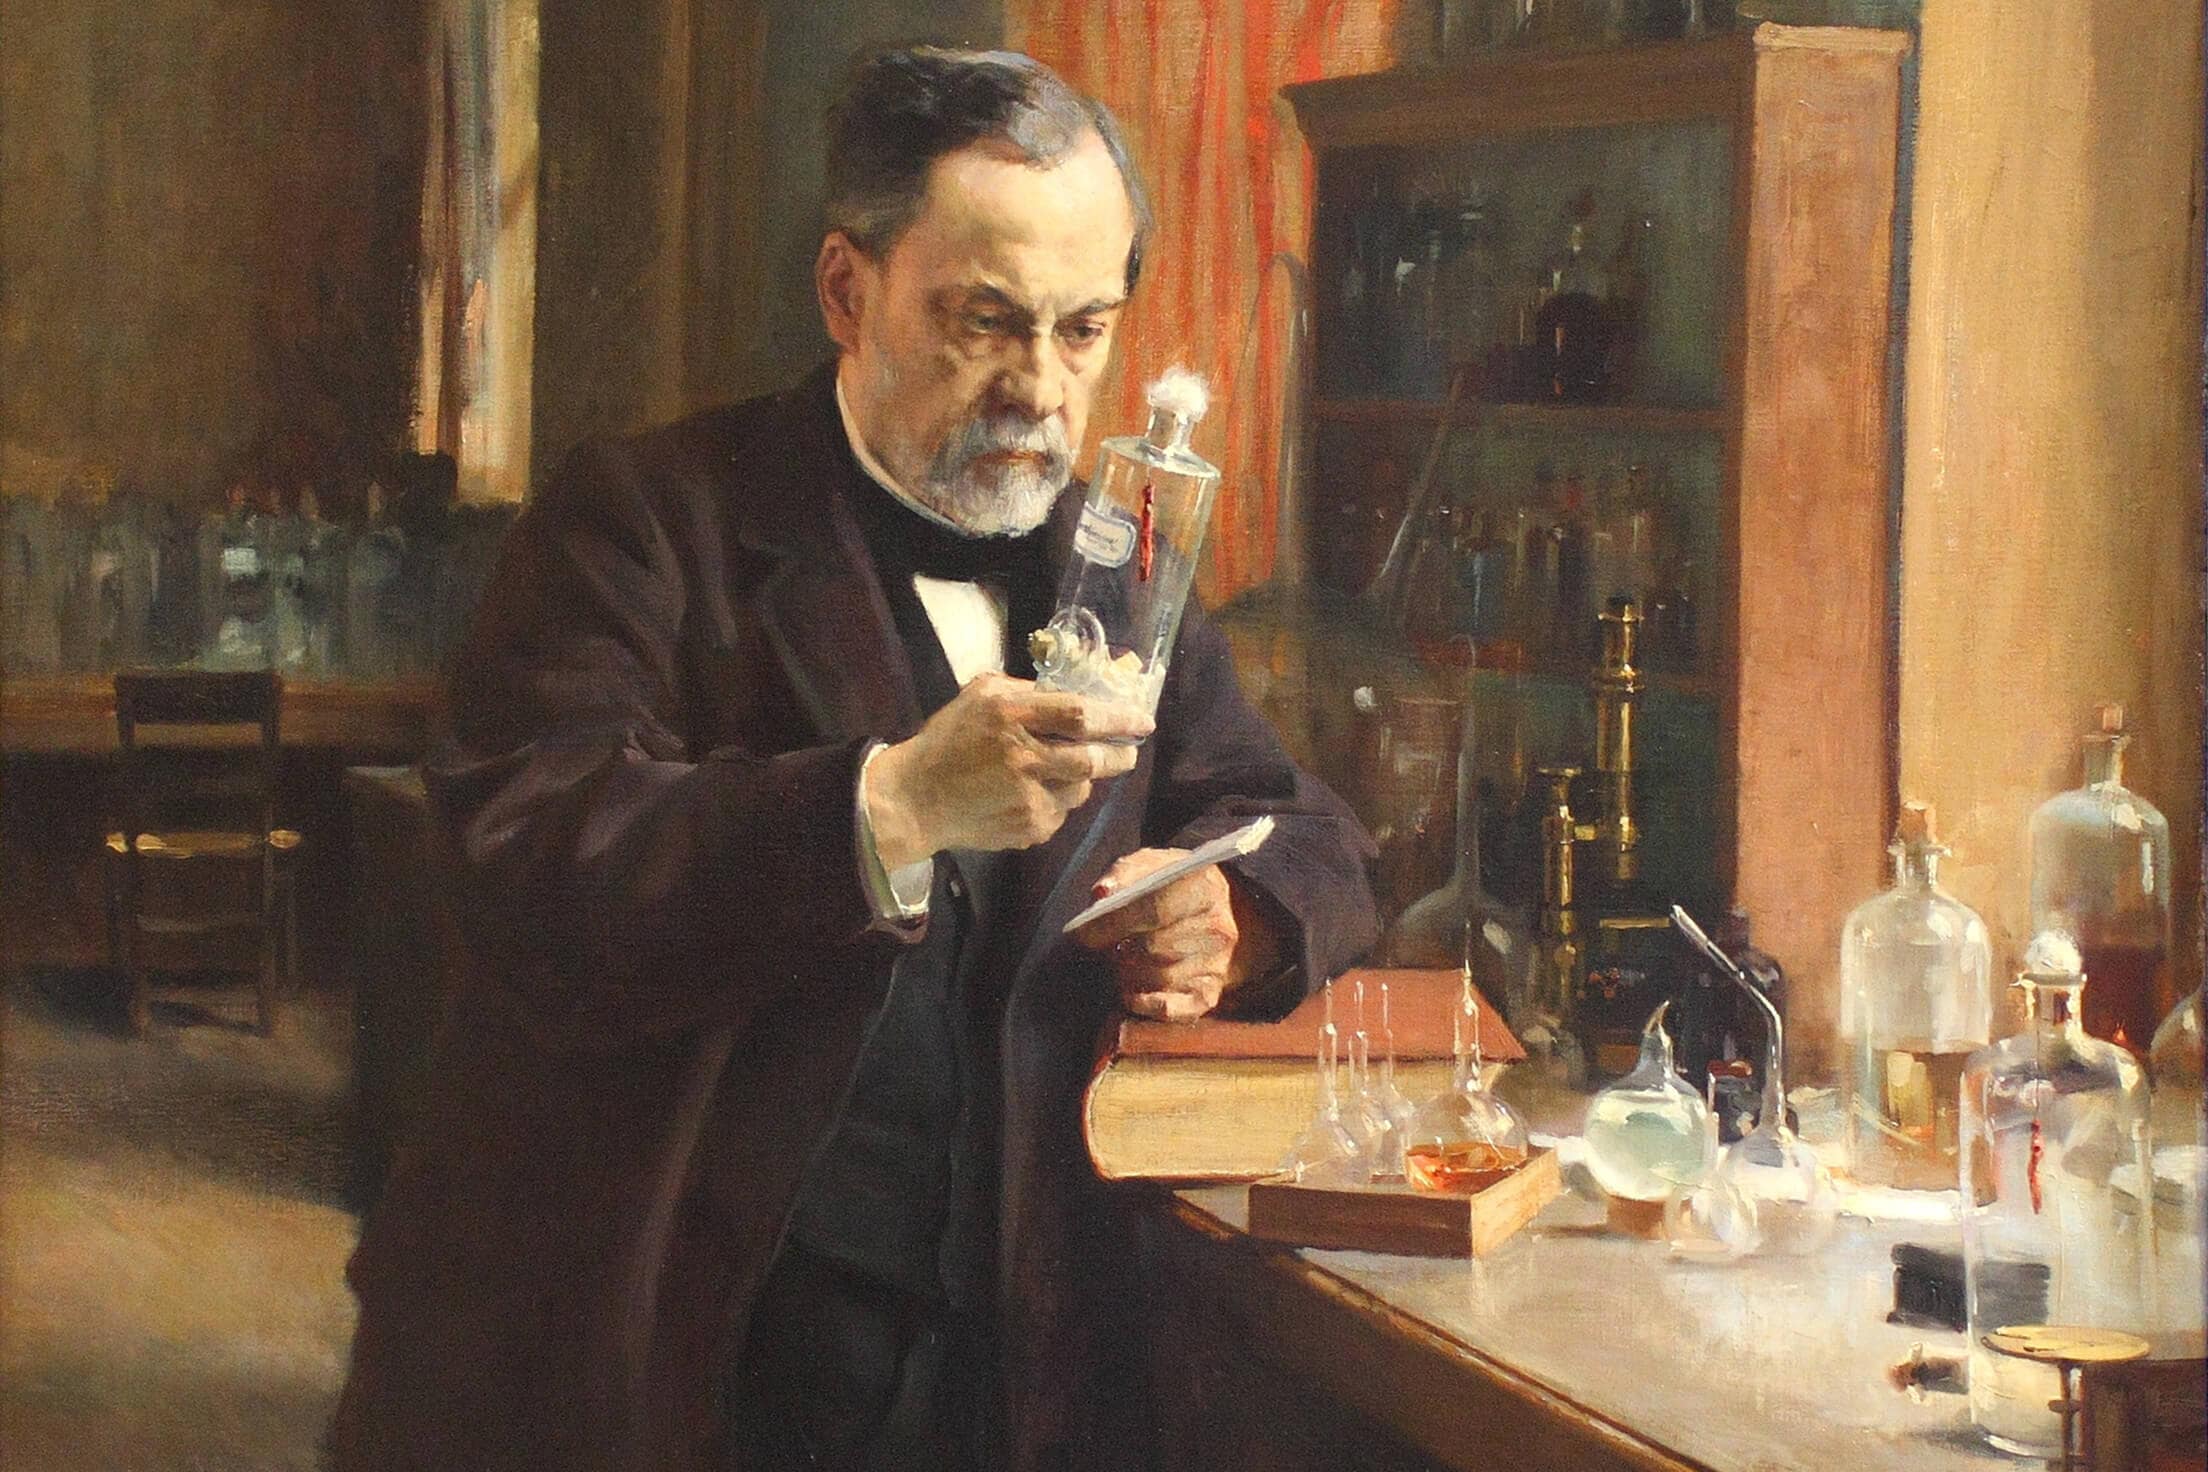  Dr. Louis Pasteur standing in his lab holding a bottle